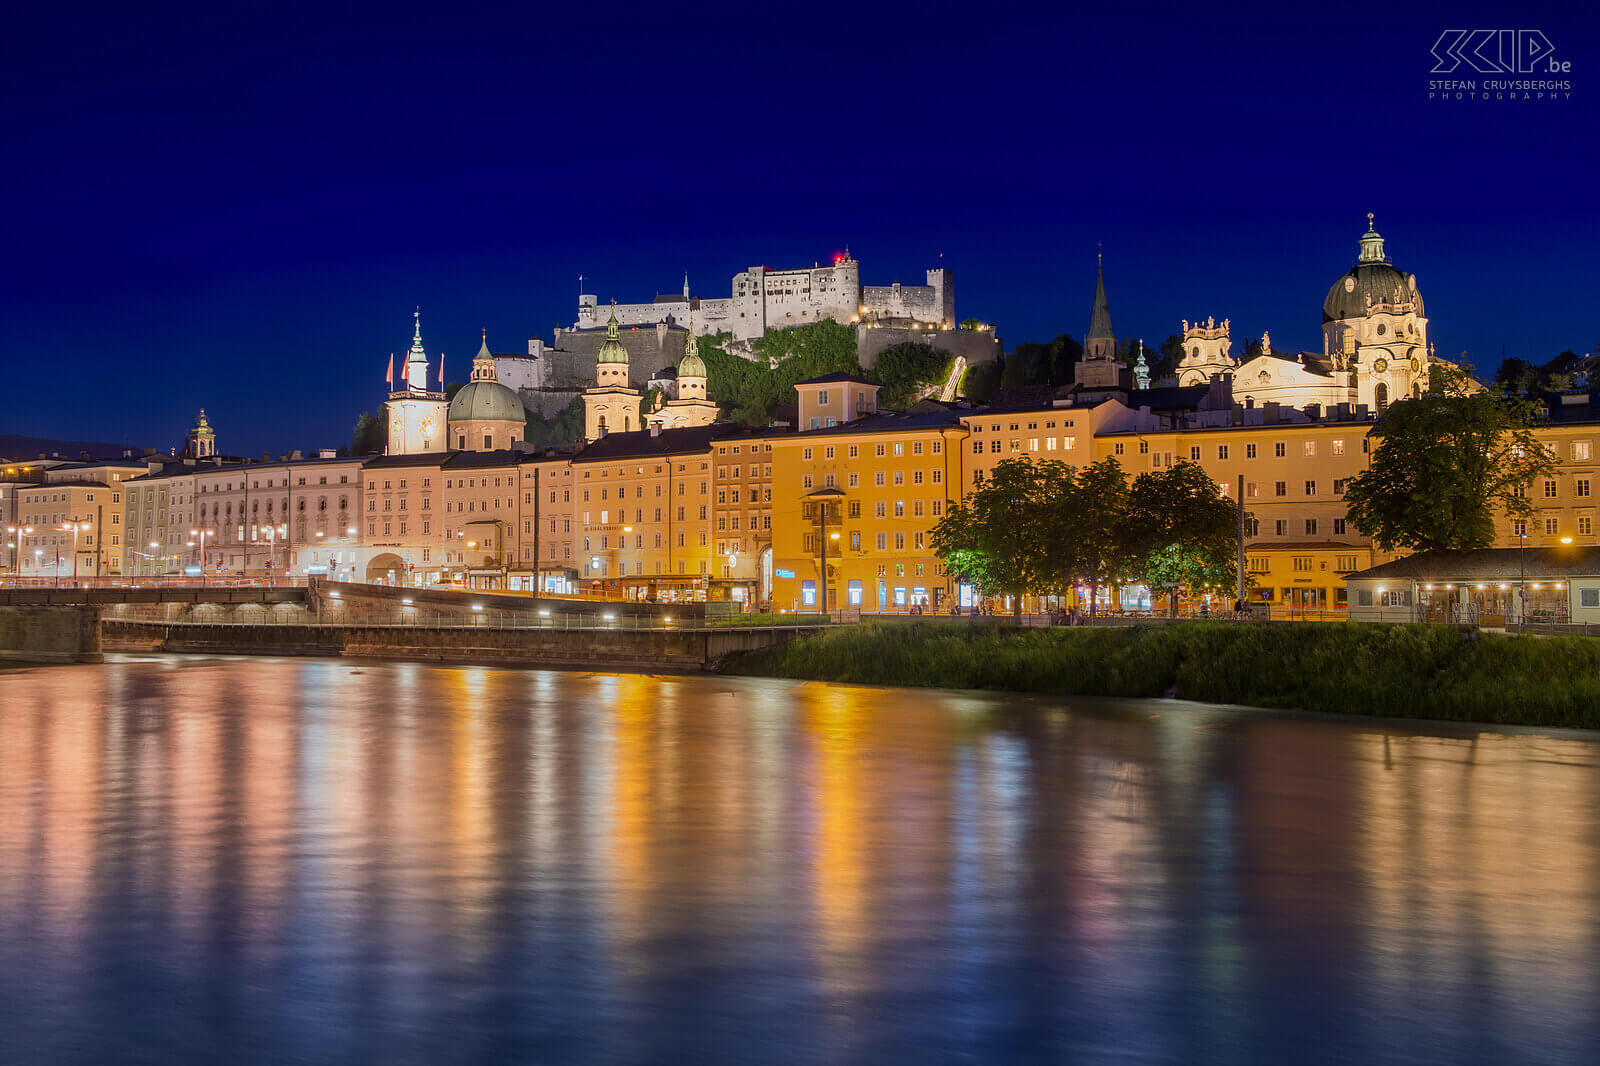 Austria - Salzburg - By night View of the river, the old town of Salzburg and the Festung Hohensalzburg. Stefan Cruysberghs